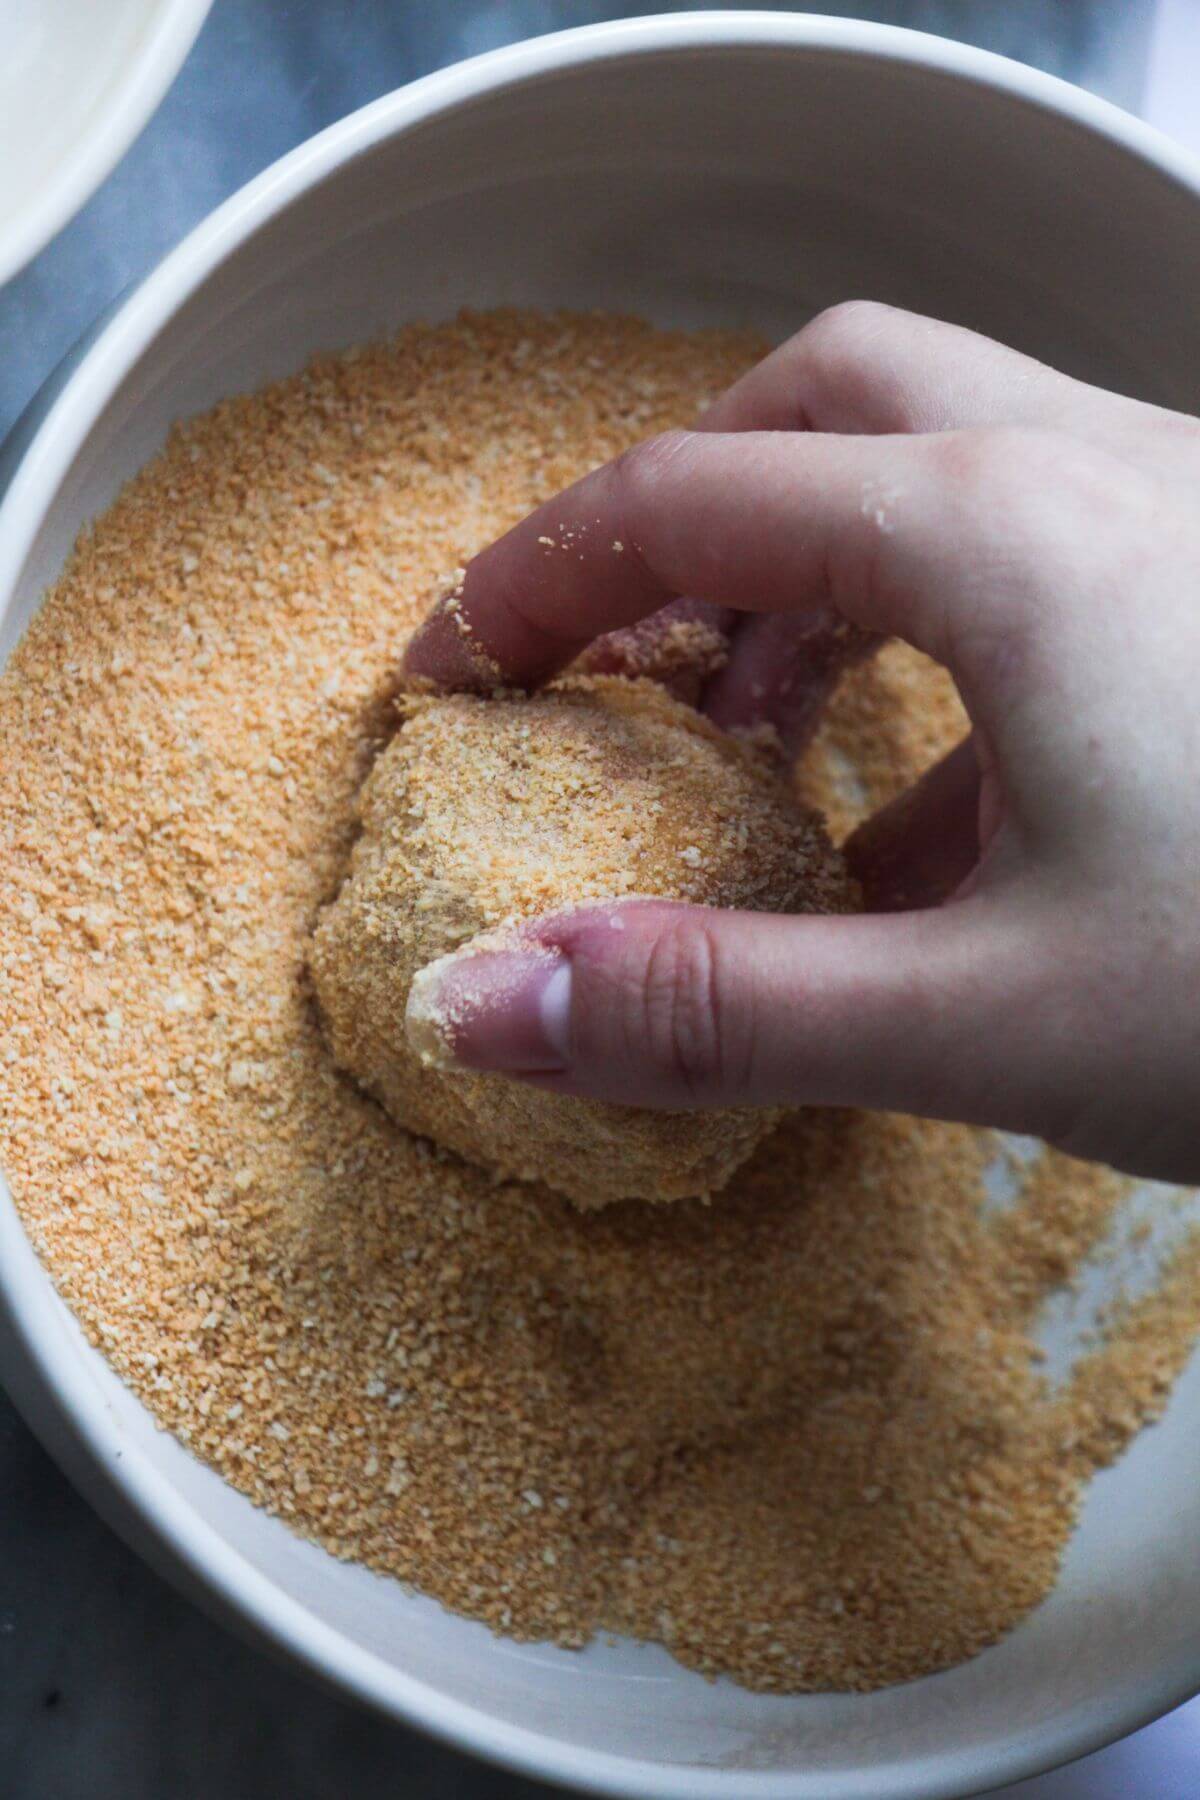 Hand tossing arancini in breadcrumbs in a white bowl.